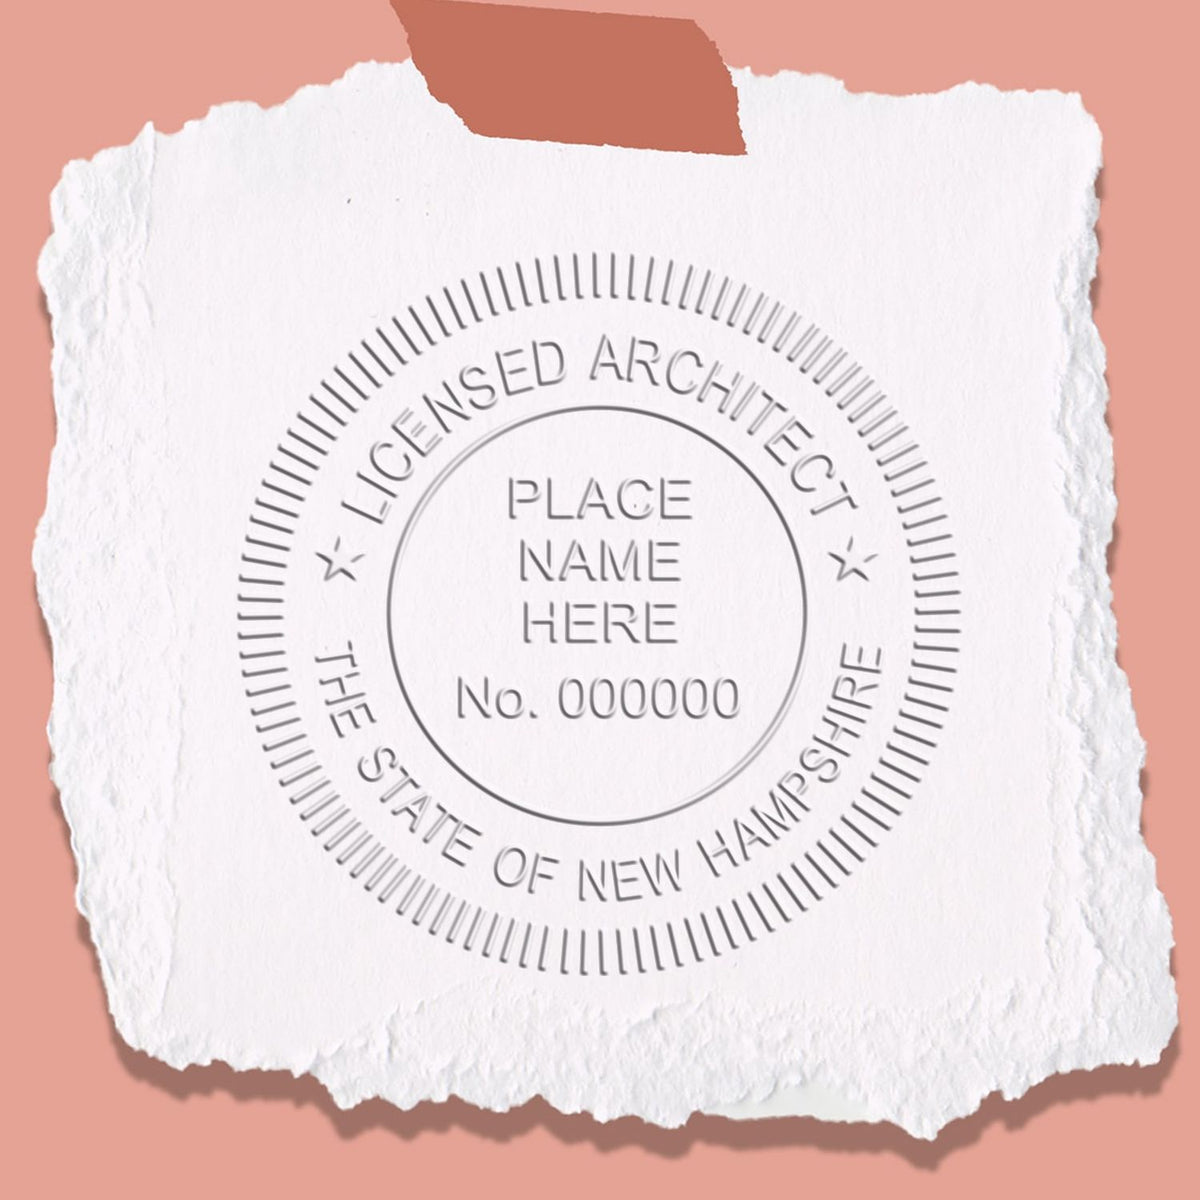 An in use photo of the Hybrid New Hampshire Architect Seal showing a sample imprint on a cardstock